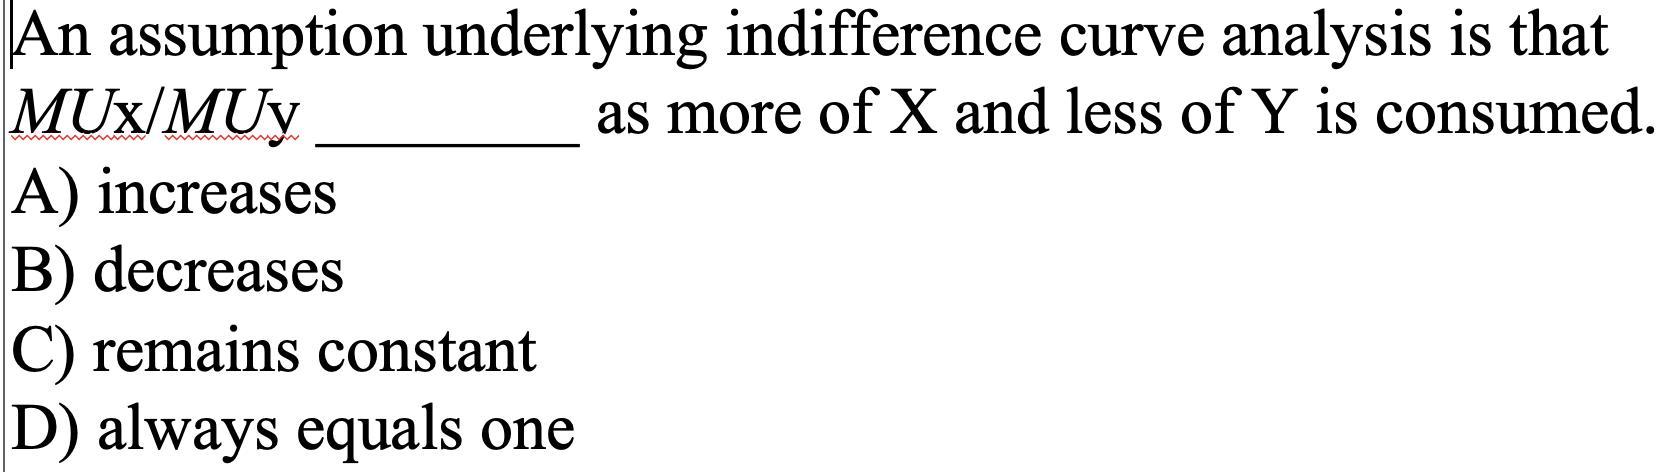 An assumption underlying indifference curve analysis is that ( M U mathrm{x} / M U mathrm{y} ) as more of ( X ) and les